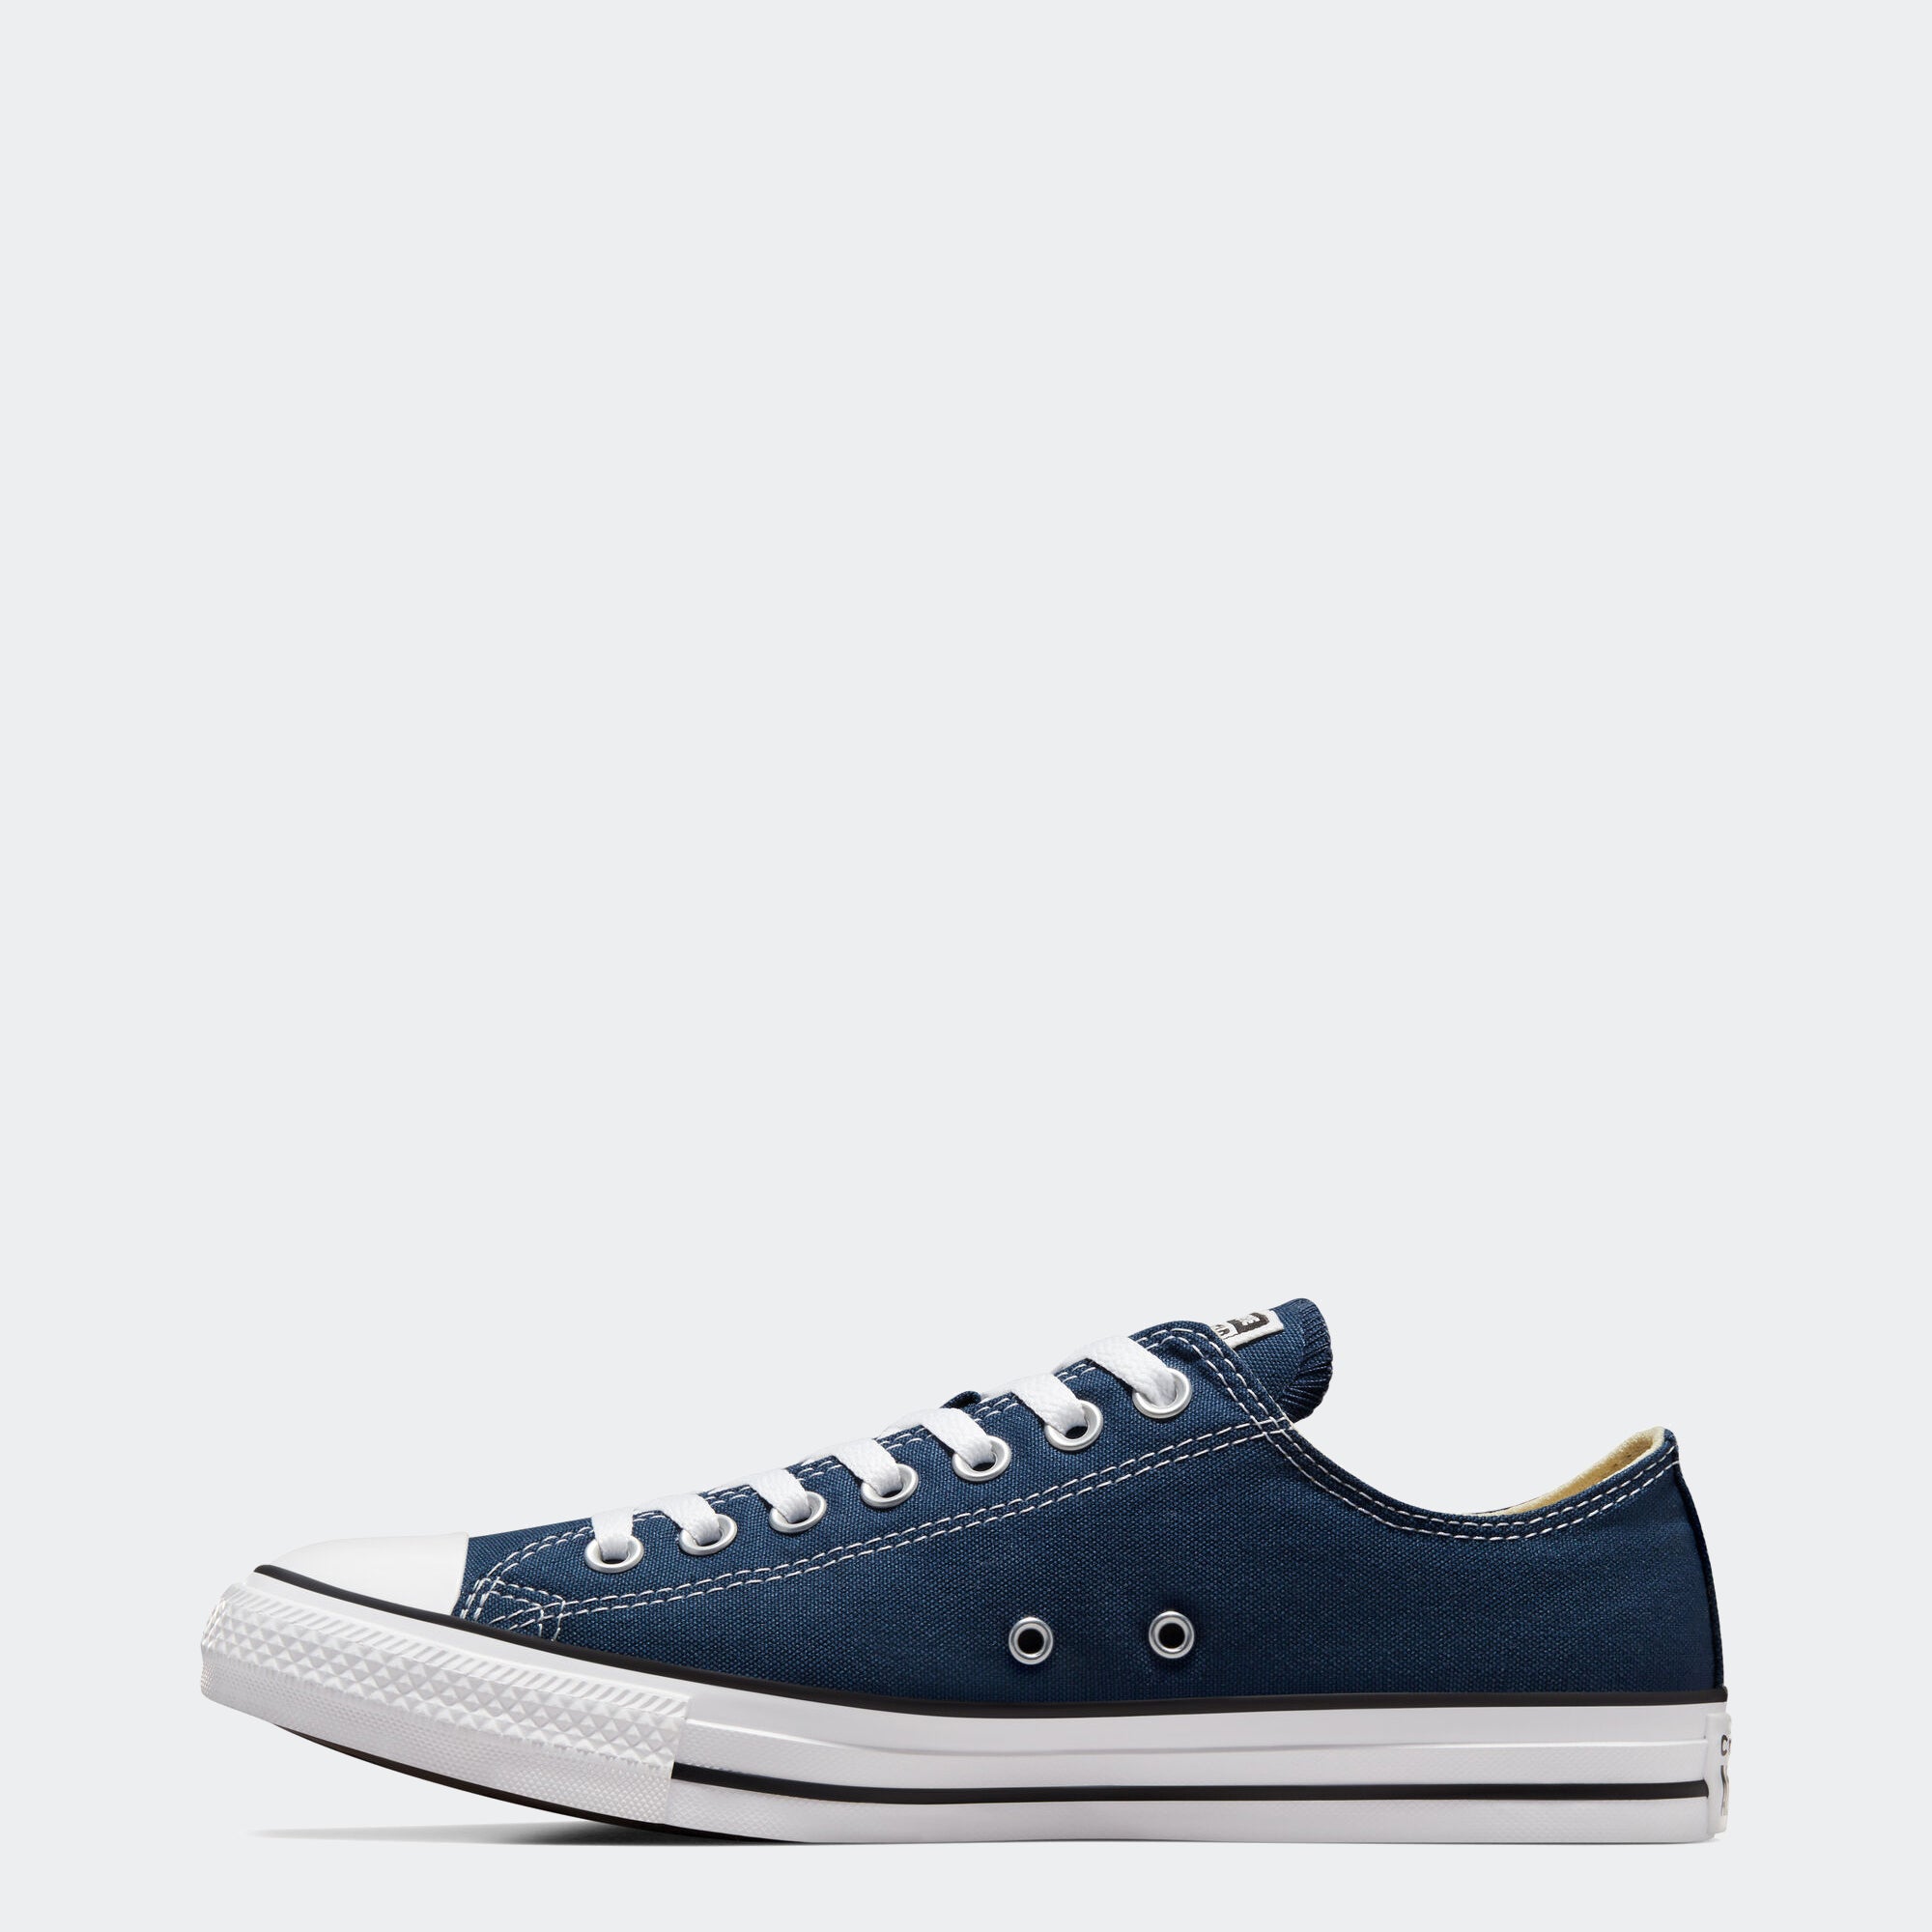 Chuck Taylor All Star Ox Sneakers Navy Chicago City Sports